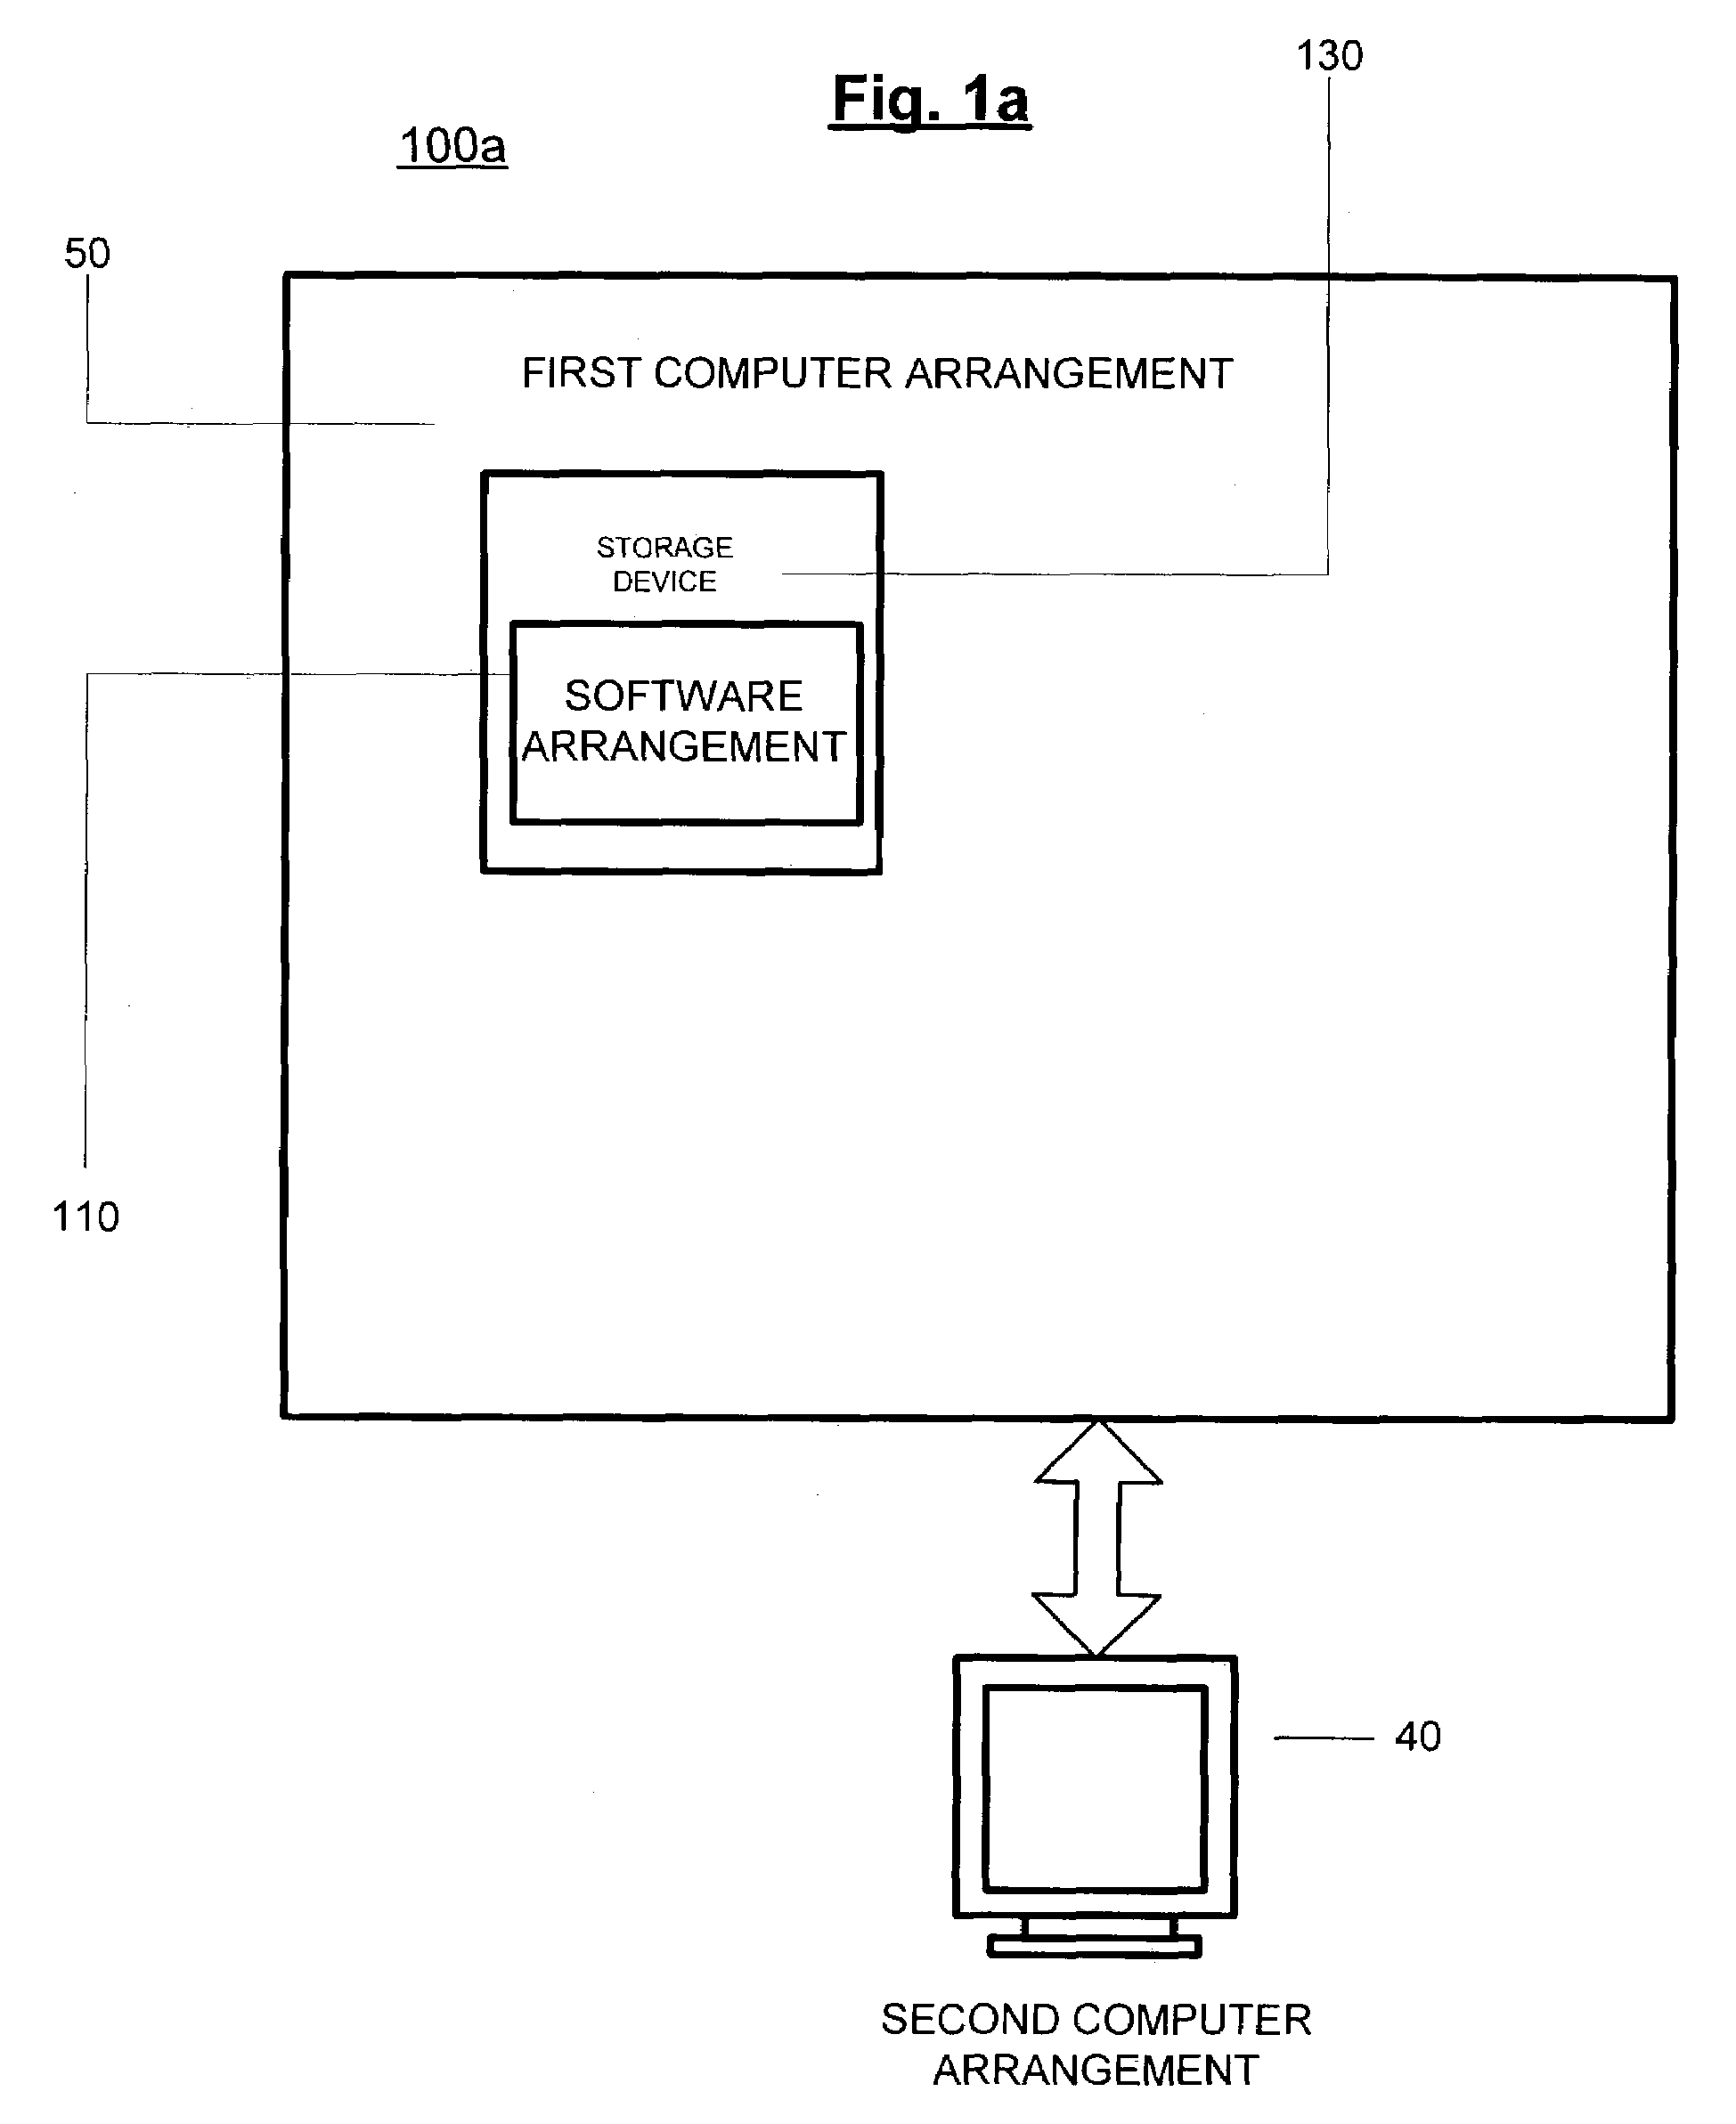 Arrangements and methods for monitoring processes and devices using a web service